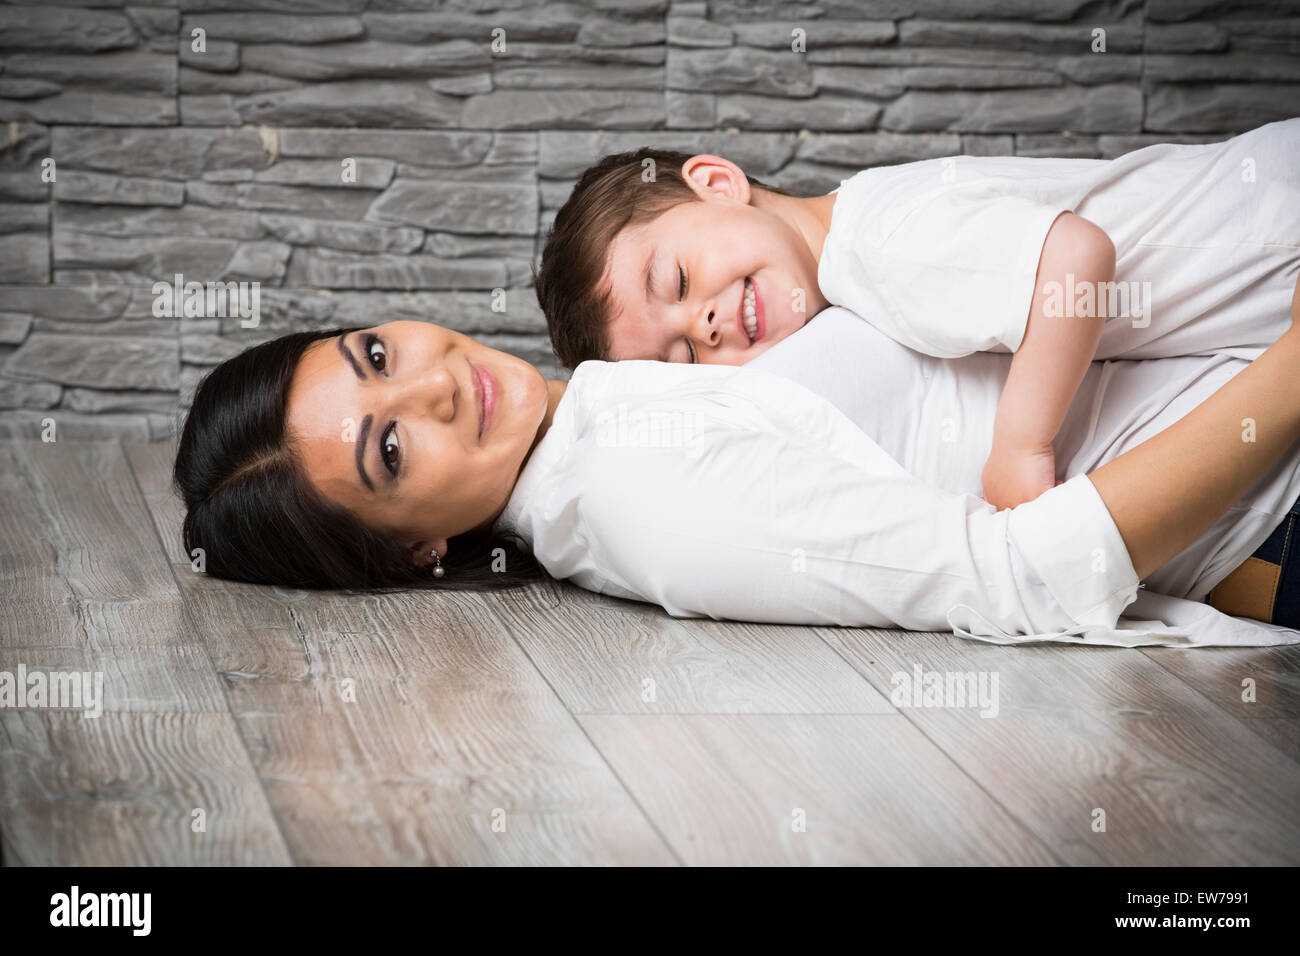 Mother and son cuddling on the floor Stock Photo